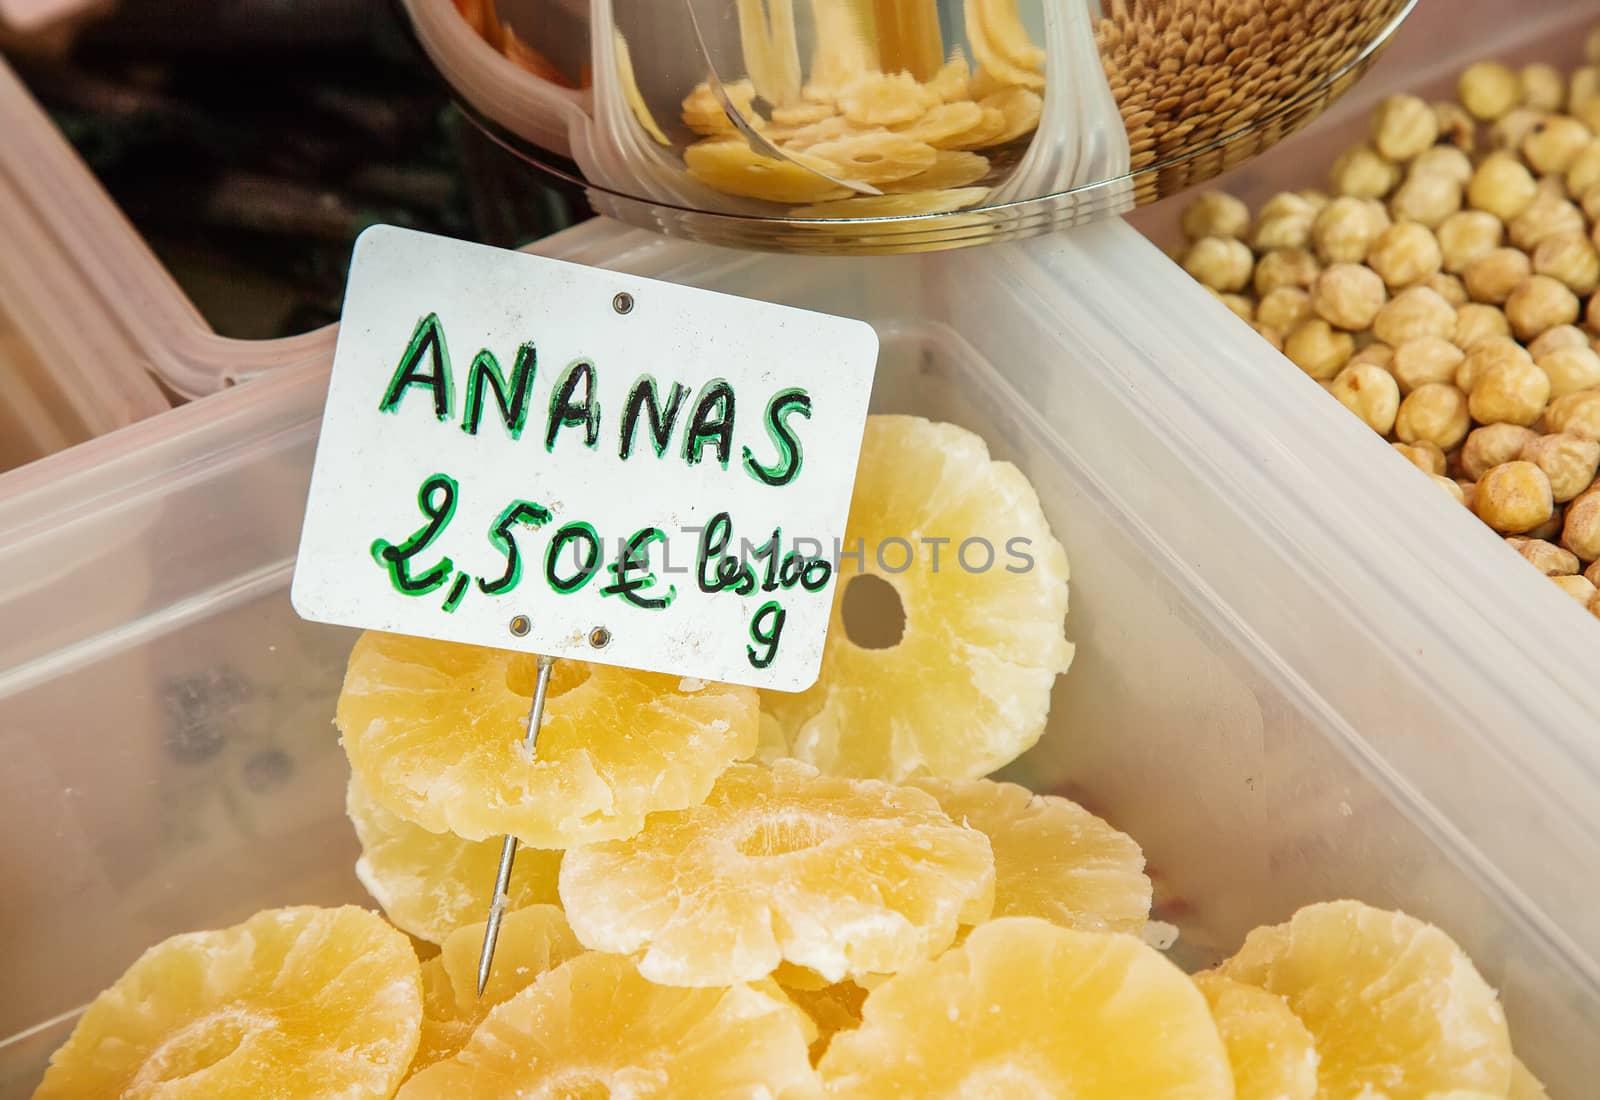 Pineapple ("Ananas" in French) , slices of dried pineapple at the food market